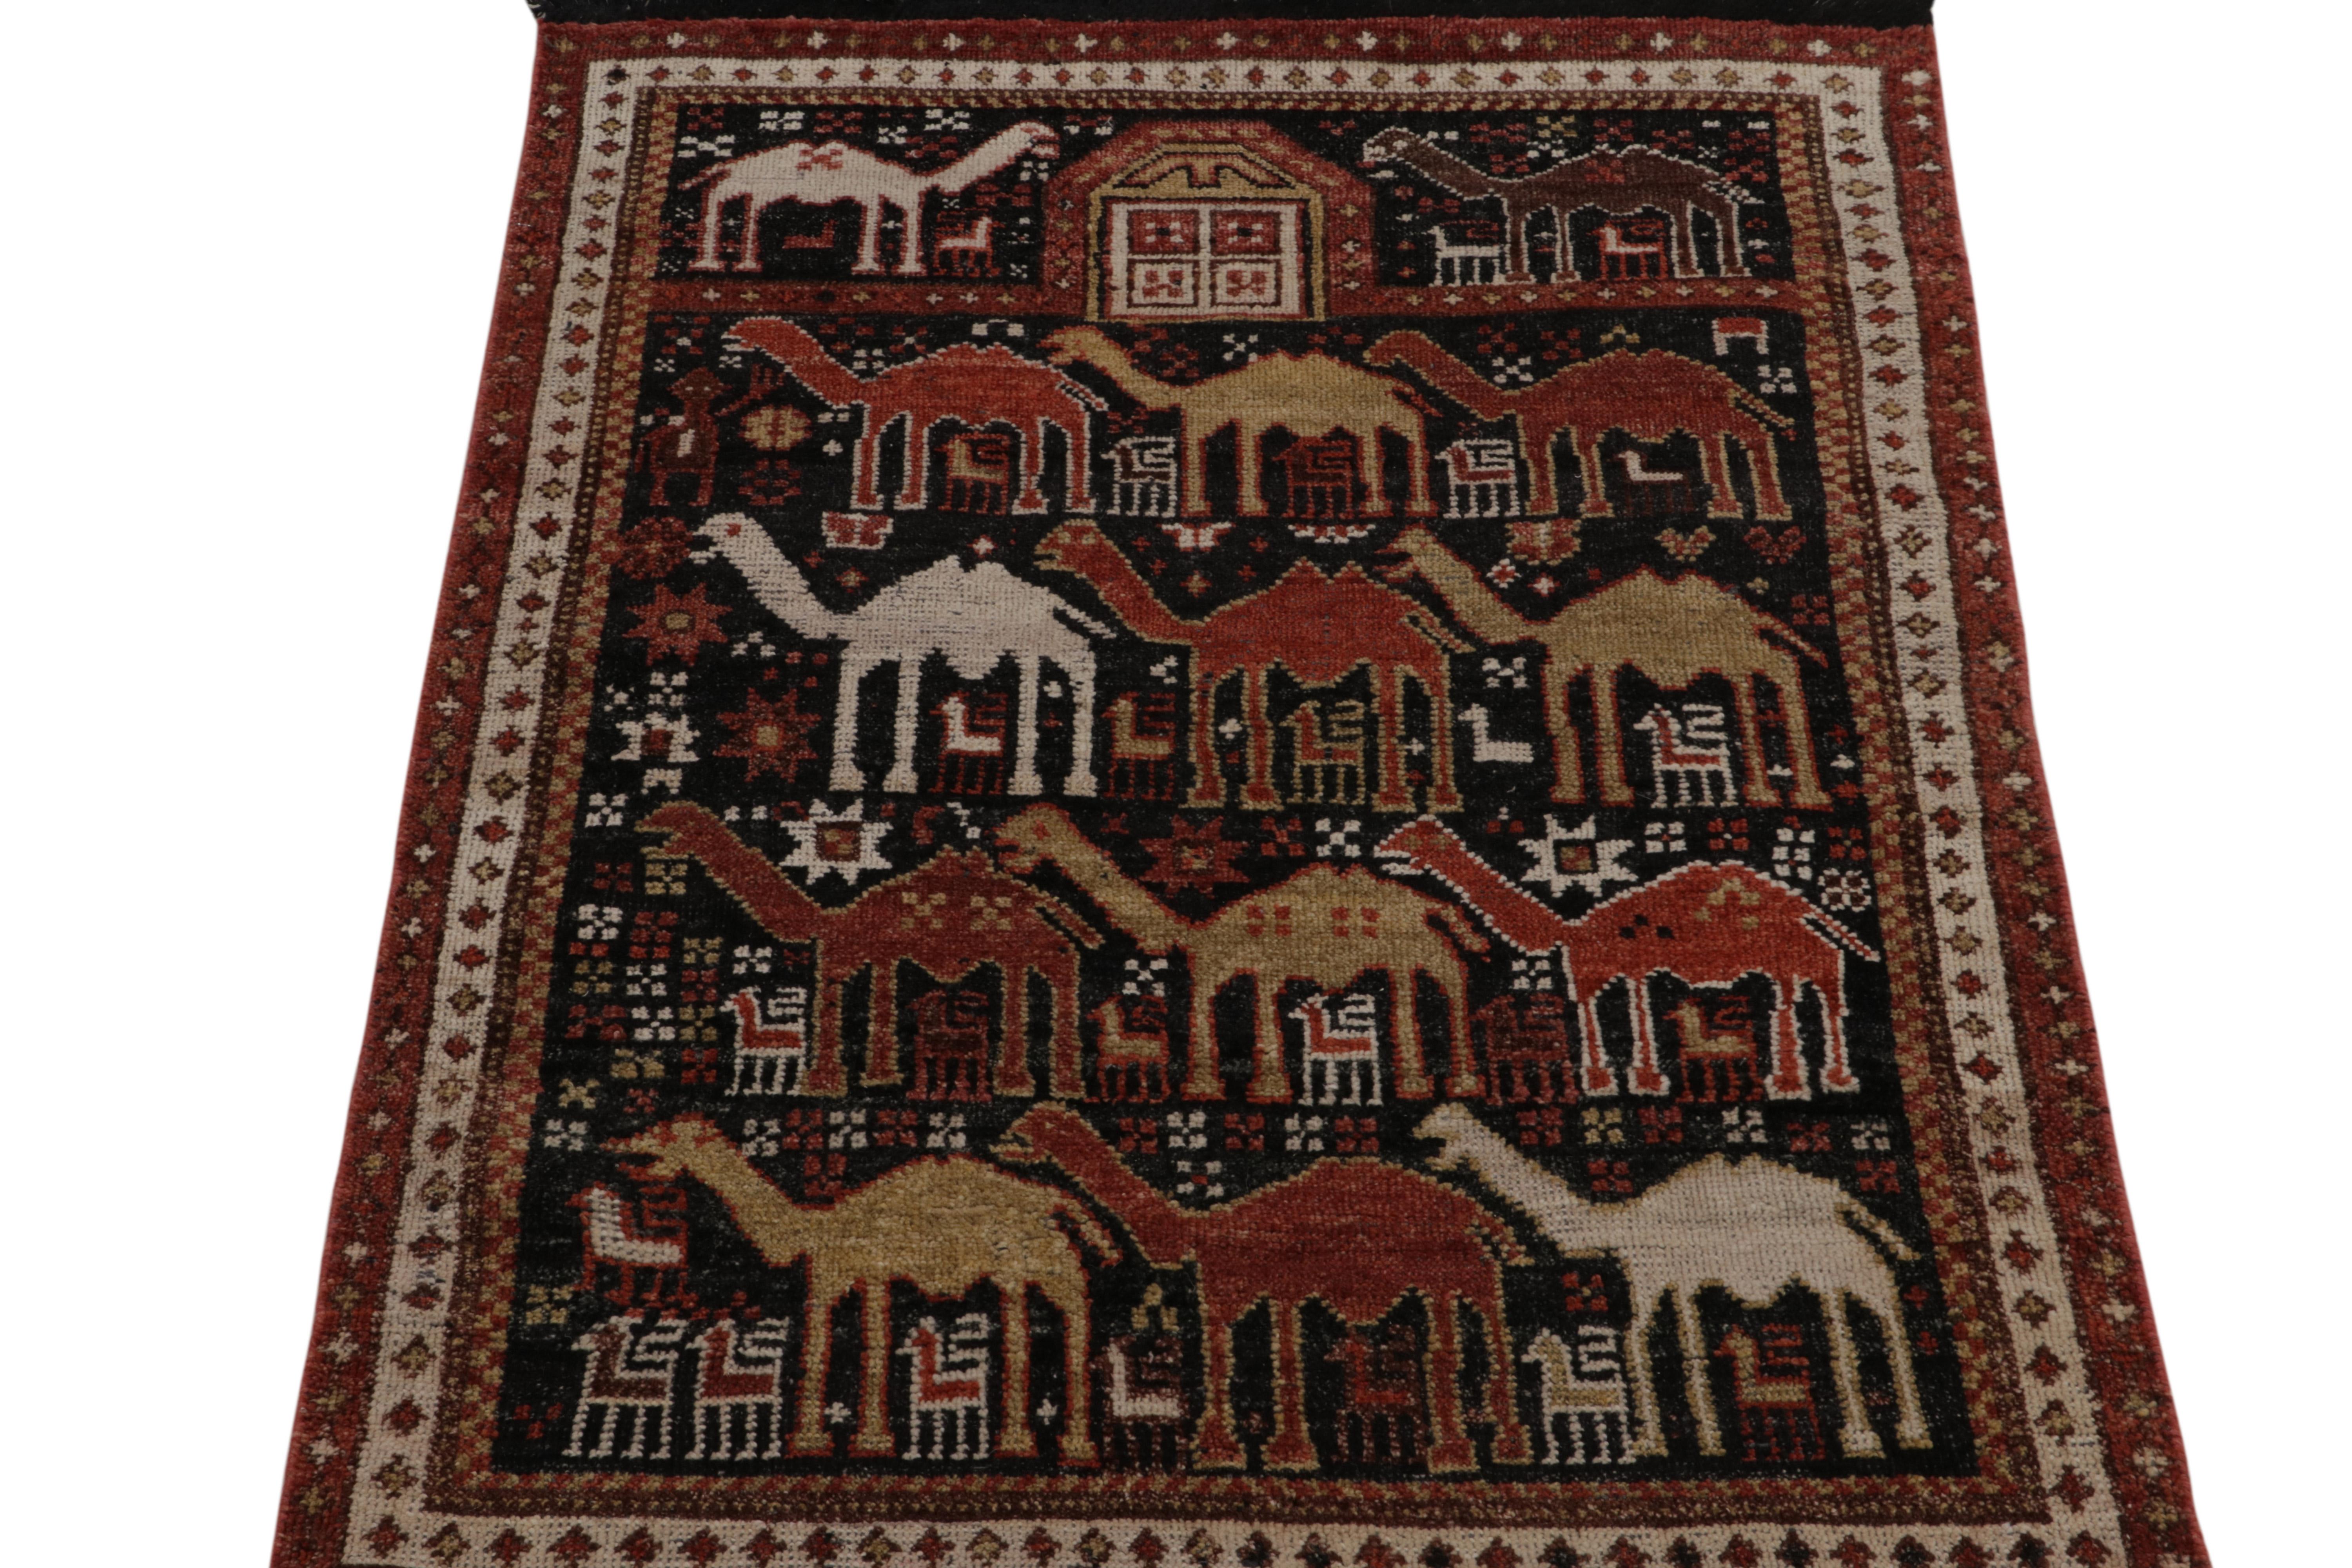 Indian Rug & Kilim’s Shirvan Tribal Style Rug in Red, Orange & Brown Pictorial Patterns For Sale